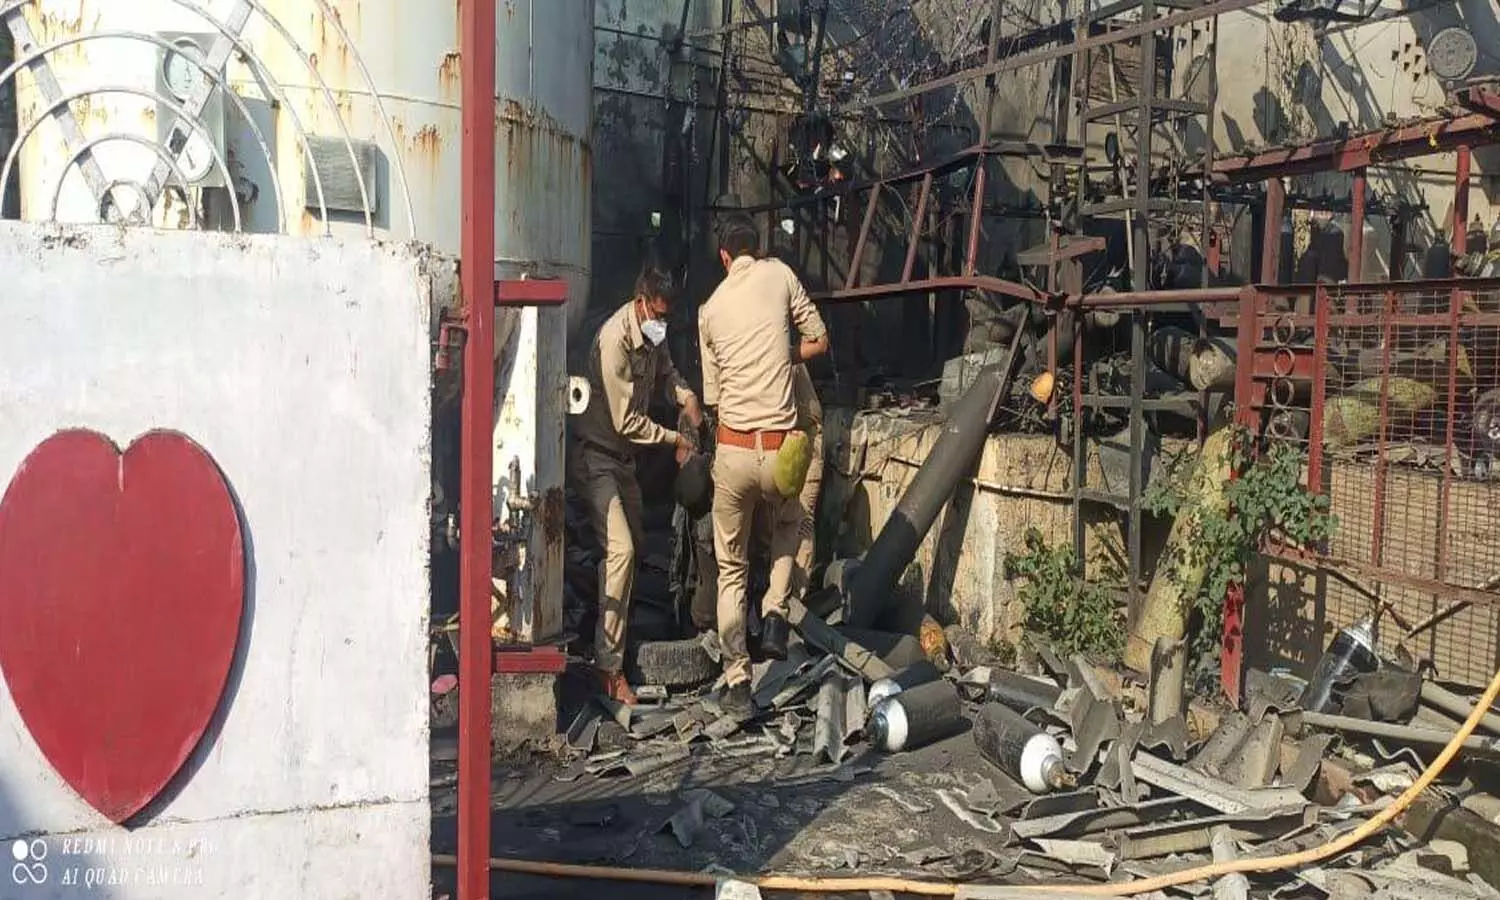 Breaking! Massive Blast at oxygen refilling plant in Lucknow, 2 died